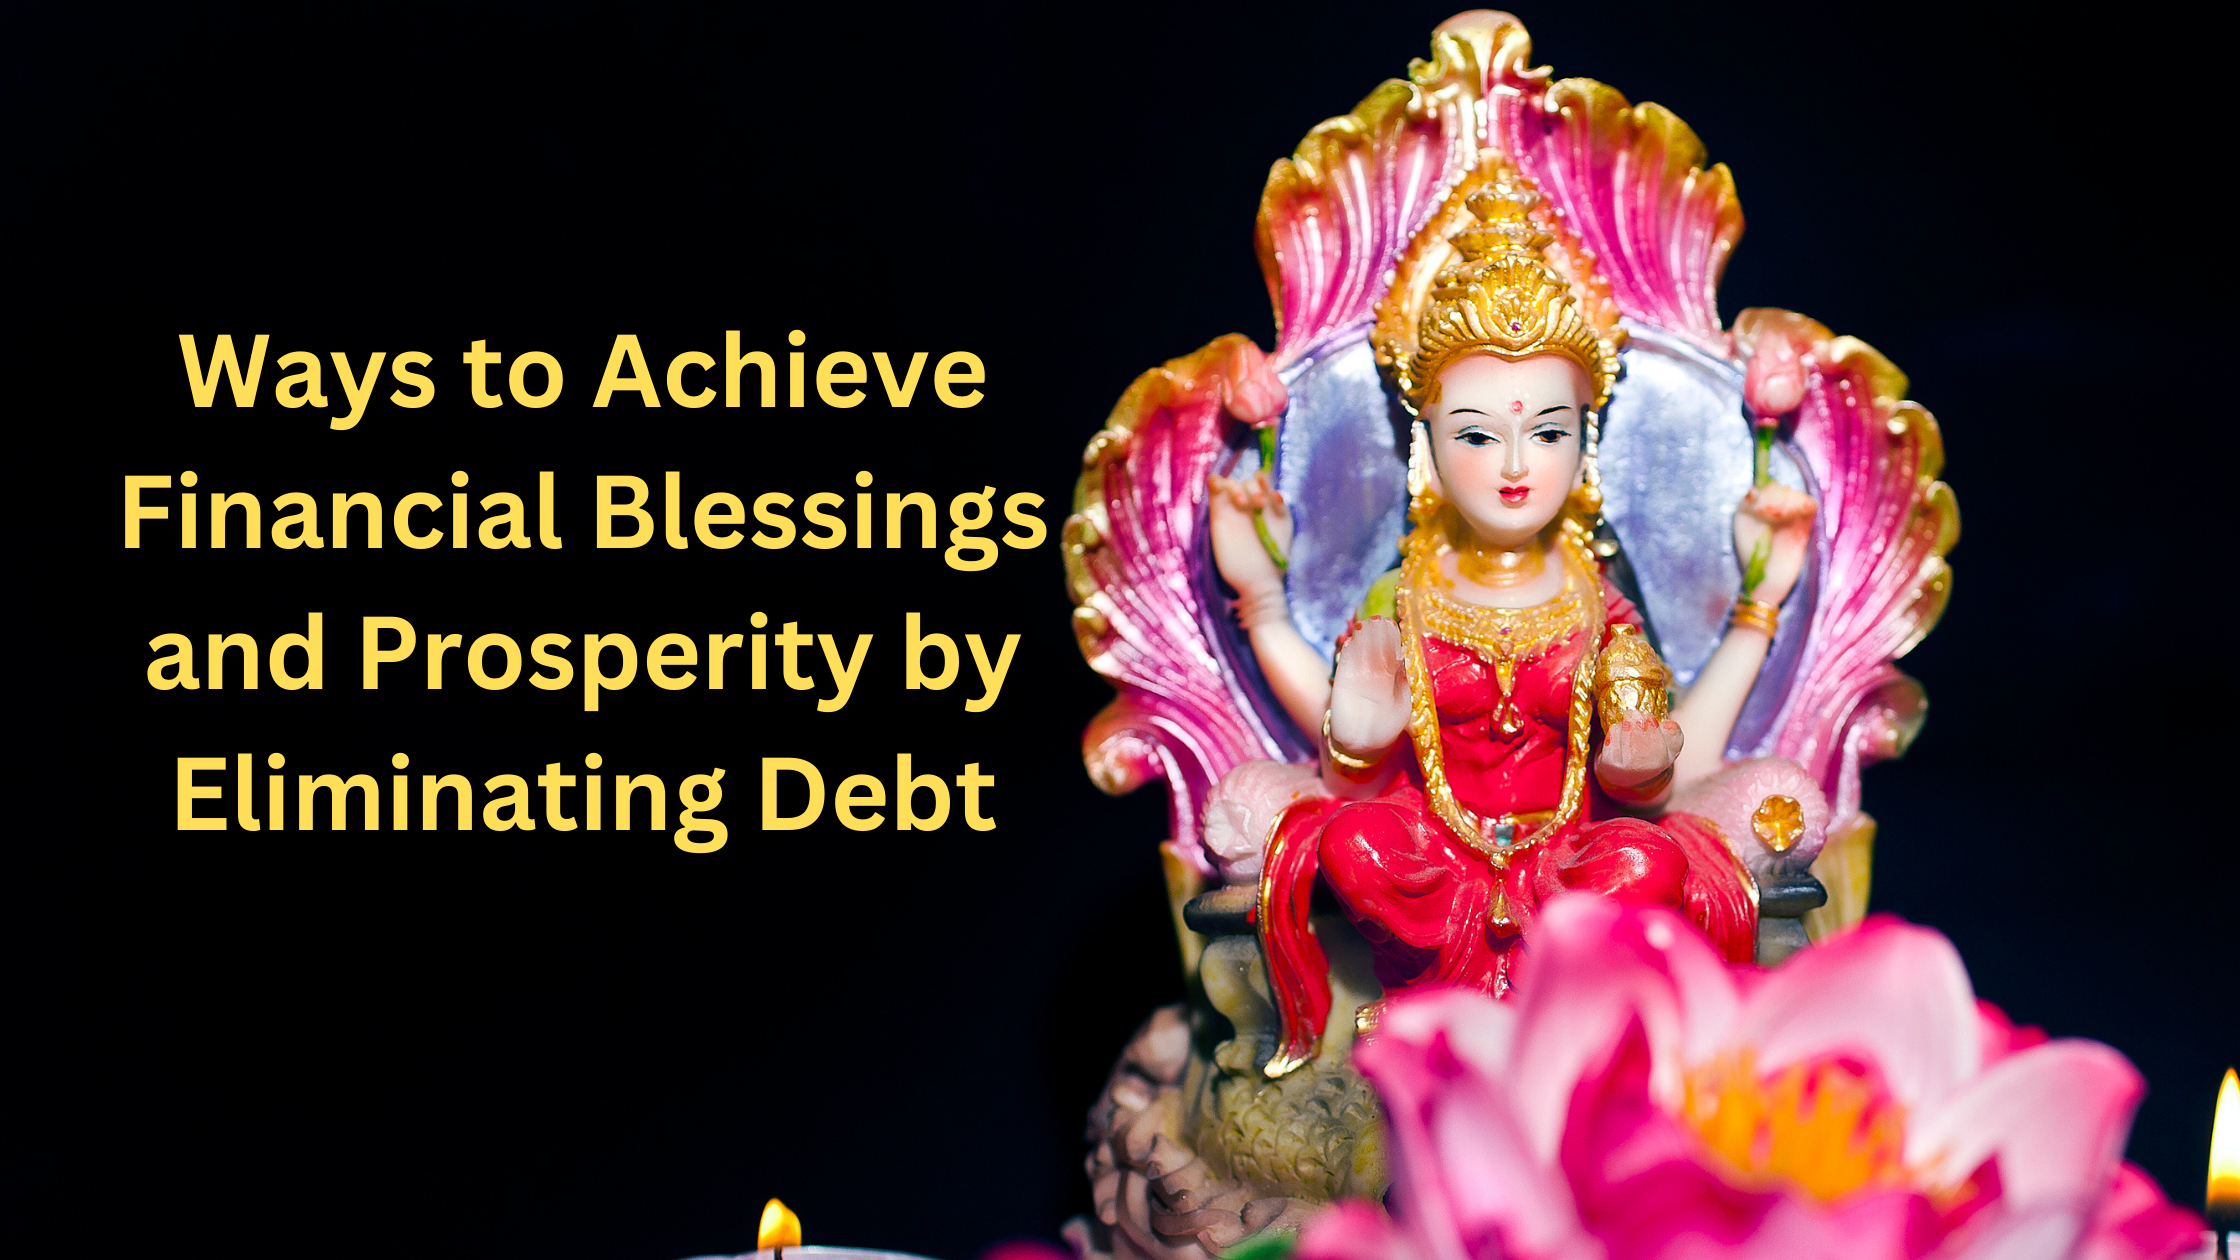 12 ways to achieve Financial blessings and prosperity by eliminating debt